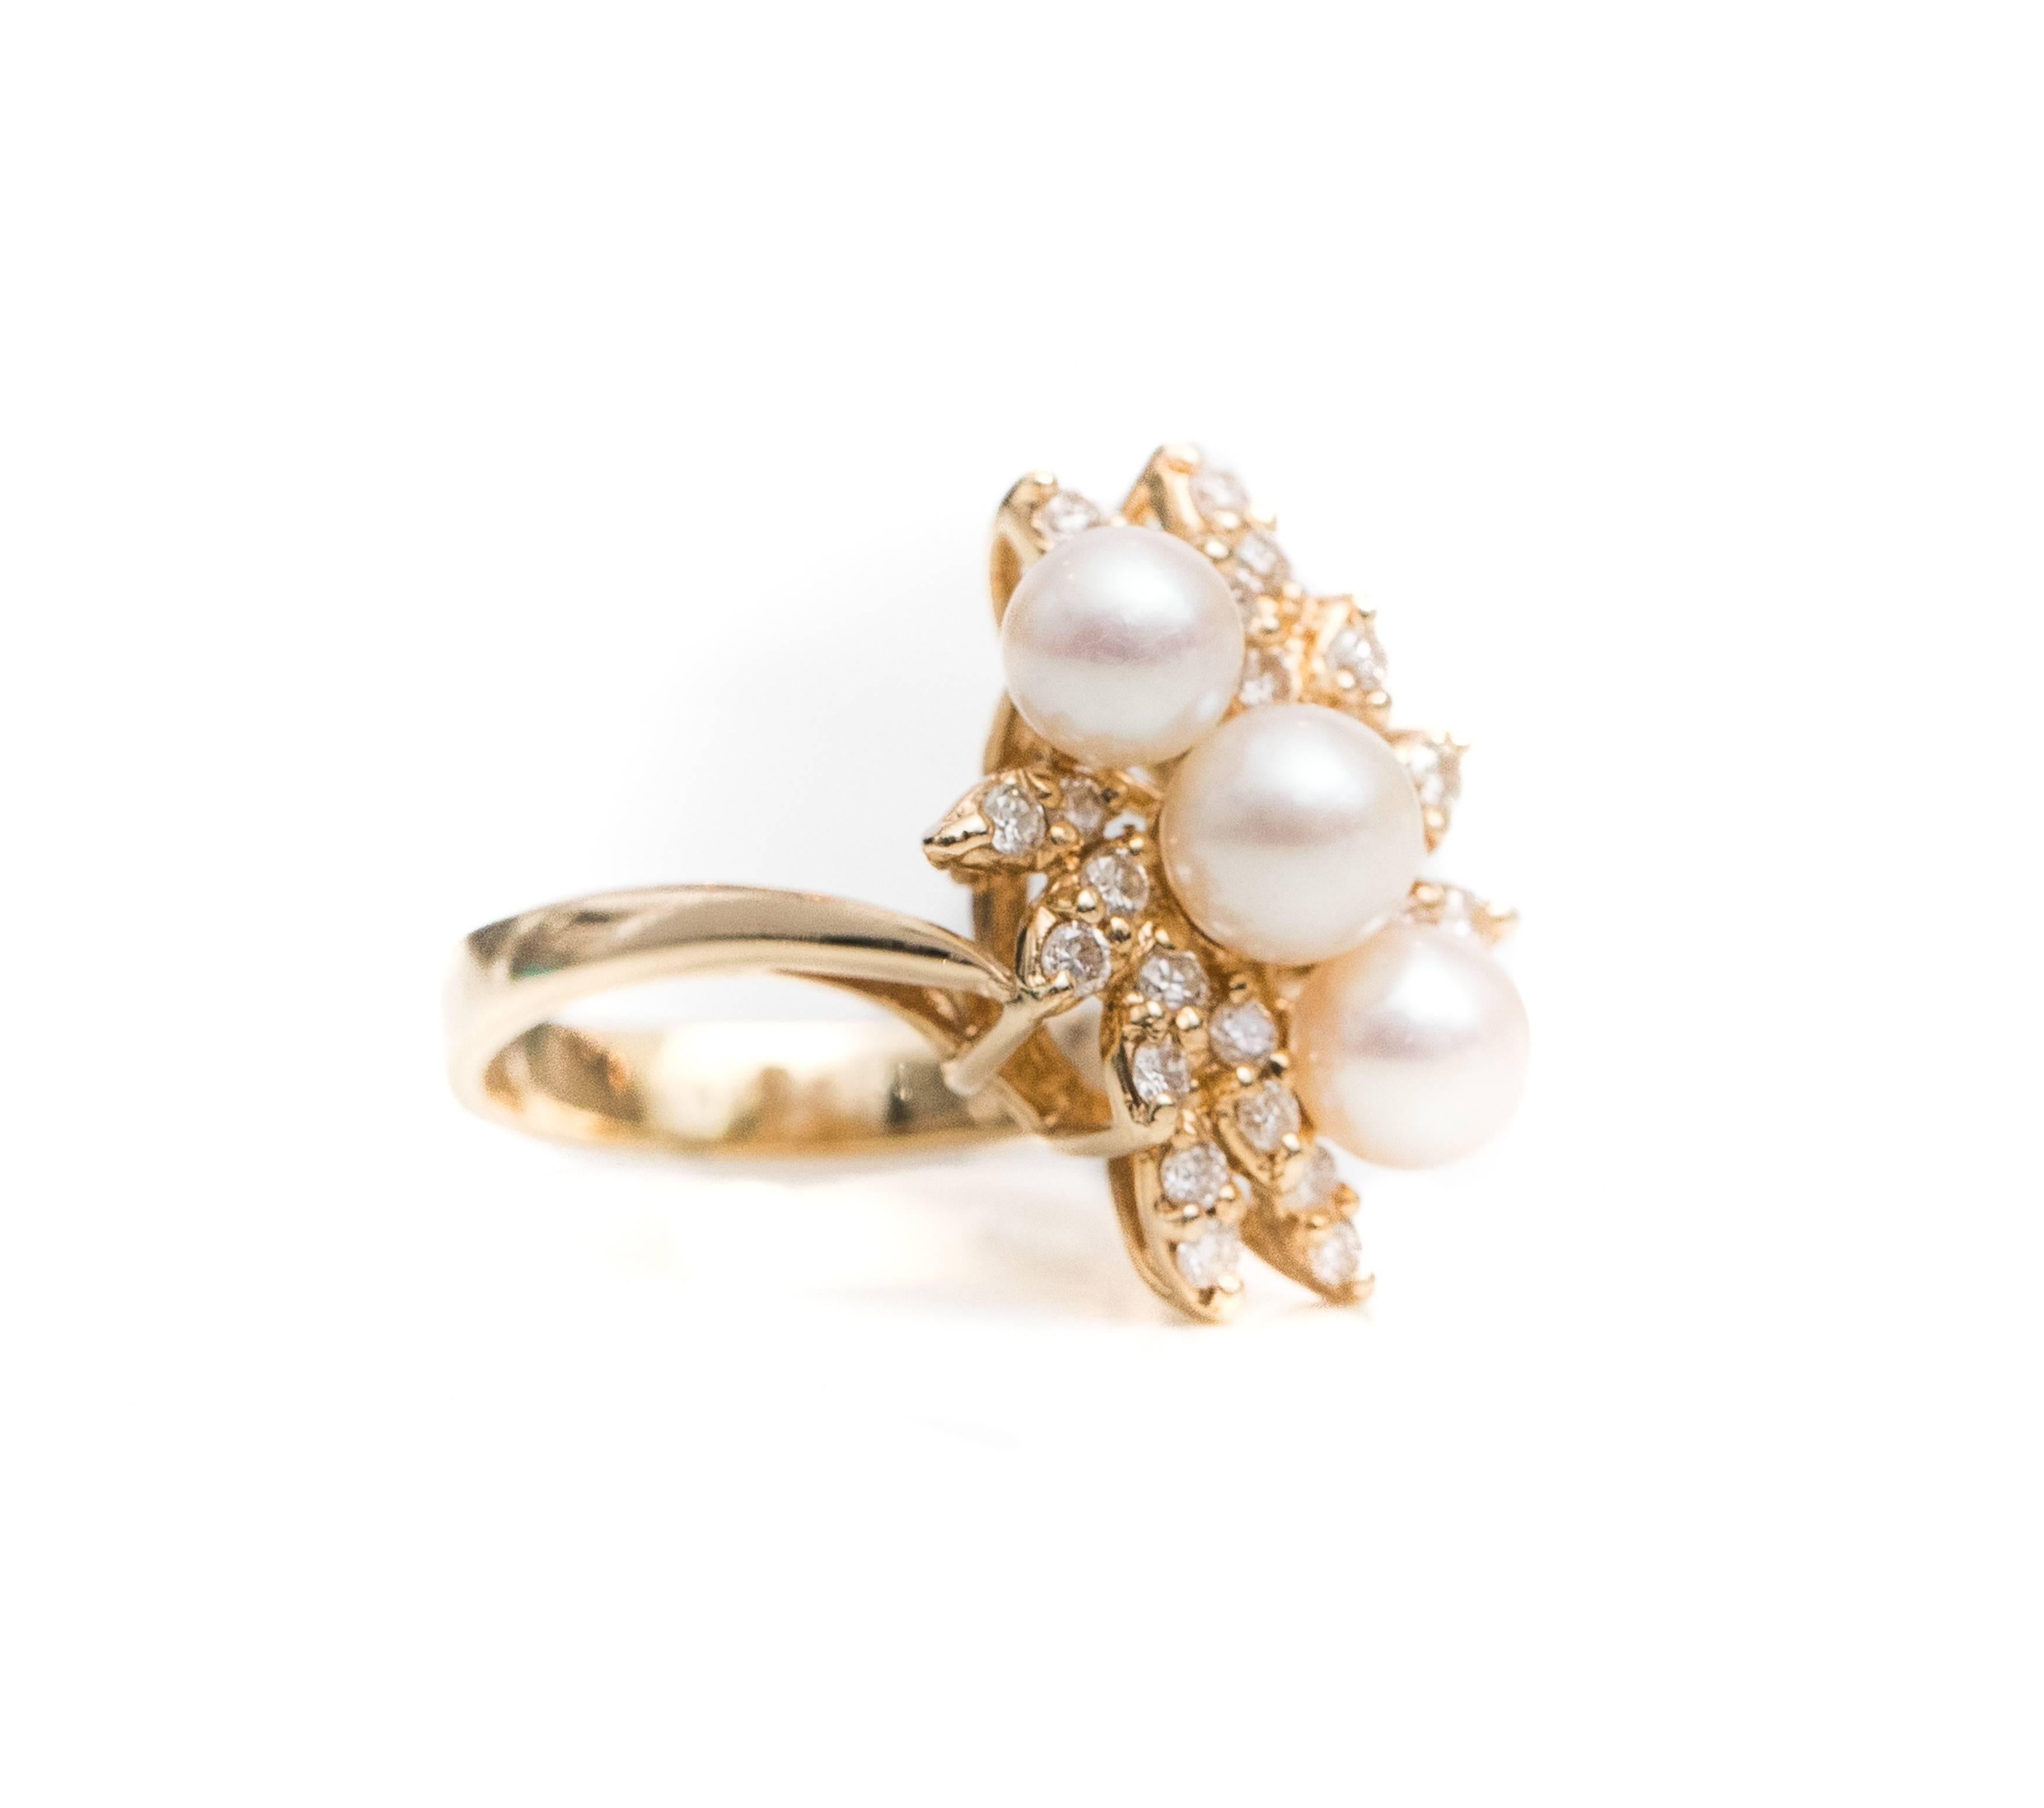 Cardow Diamond, Pearl and 14 Karat Yellow Gold Cocktail Ring

Features 3 round, white pearls and 0.25 carat total weight Round Brilliant Diamonds set in a 14 Karat Yellow Gold bypass design. 
The pearls are set in a horizontal line across the ring